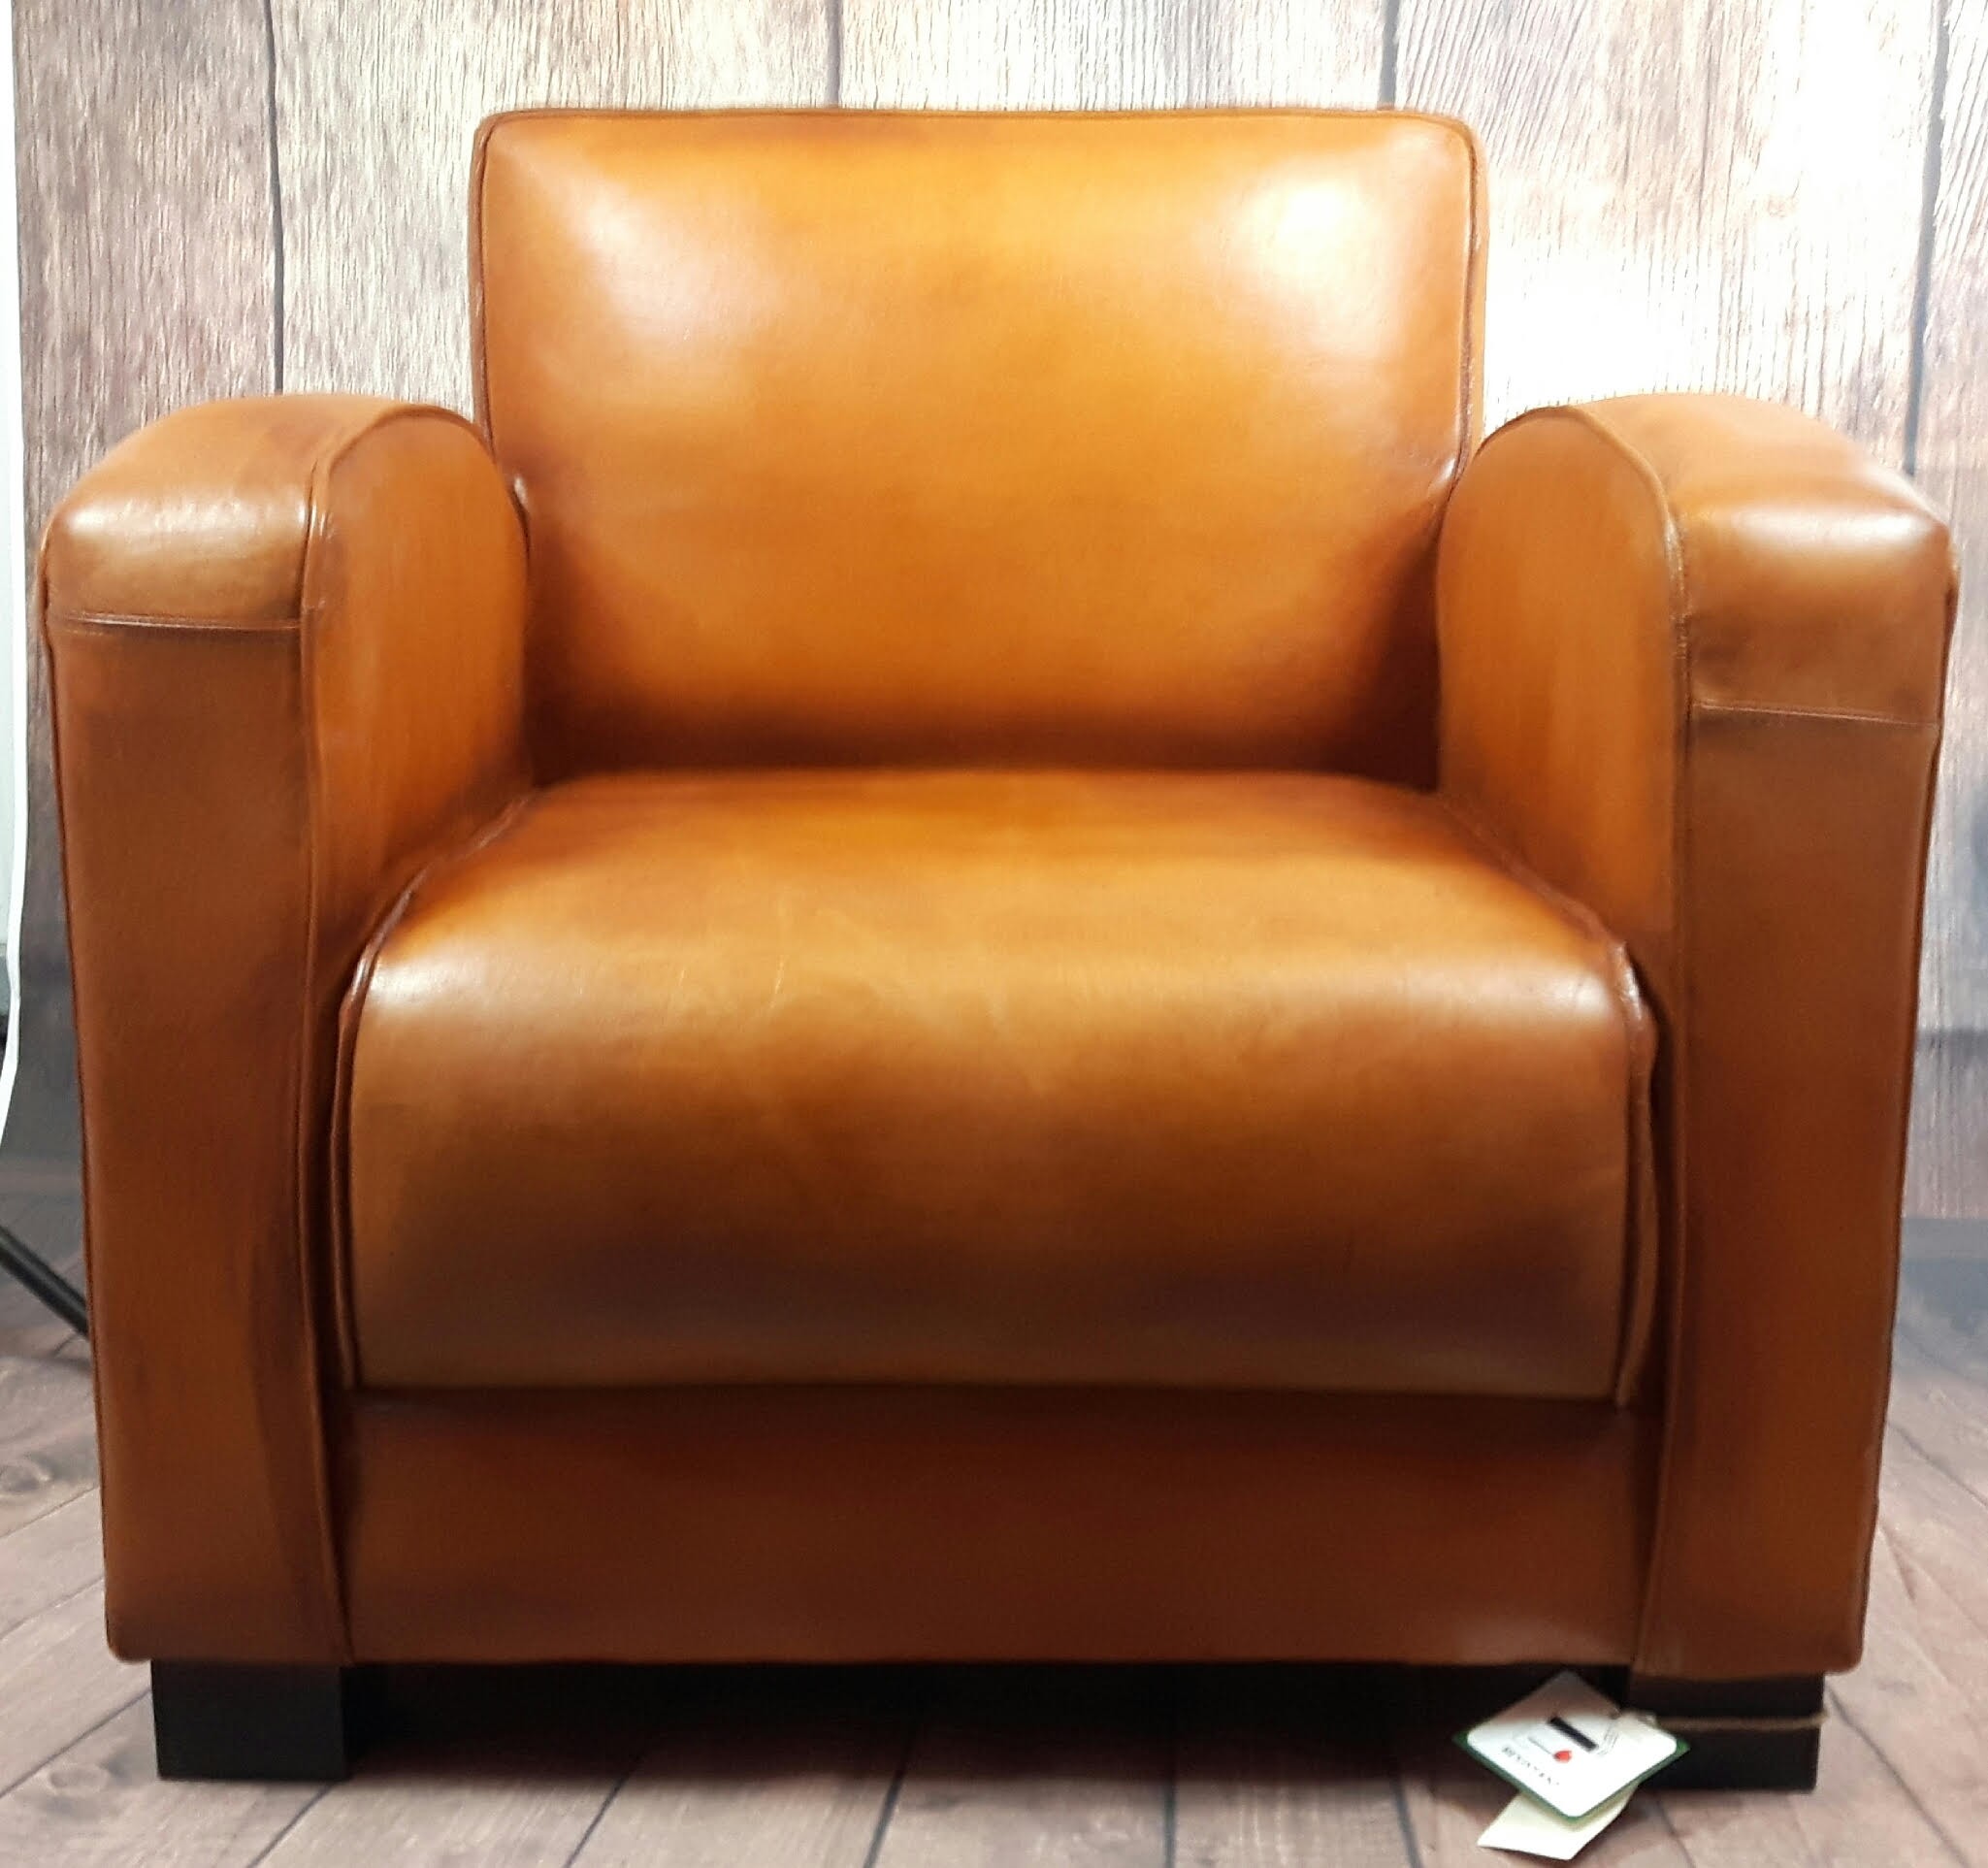 Retro leather club chair from gb salvage we stock a